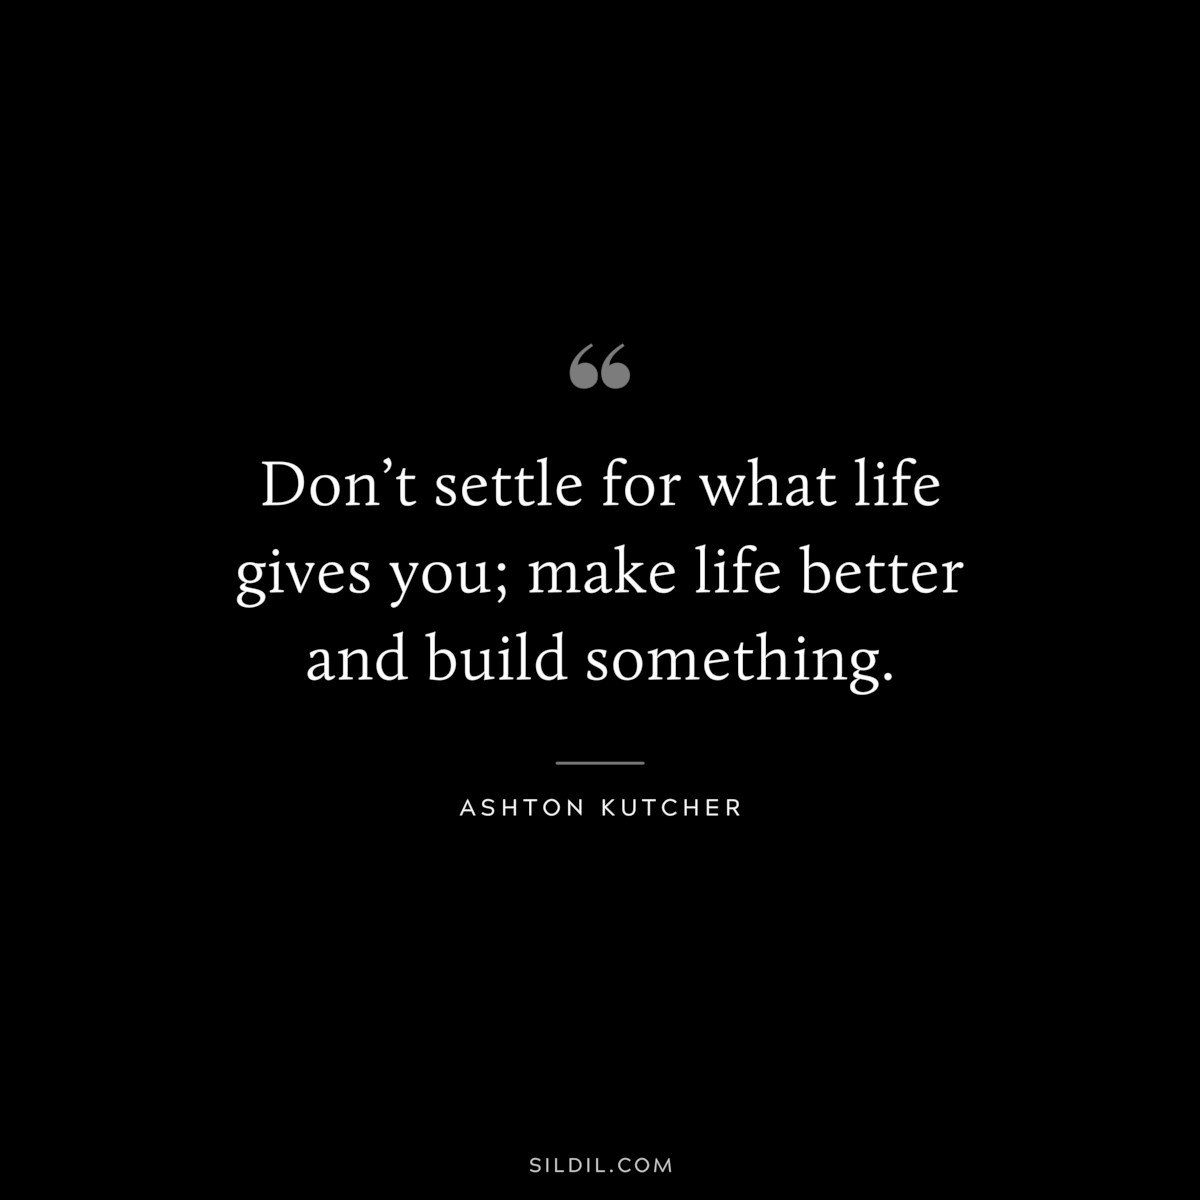 Don’t settle for what life gives you; make life better and build something. ― Ashton Kutcher